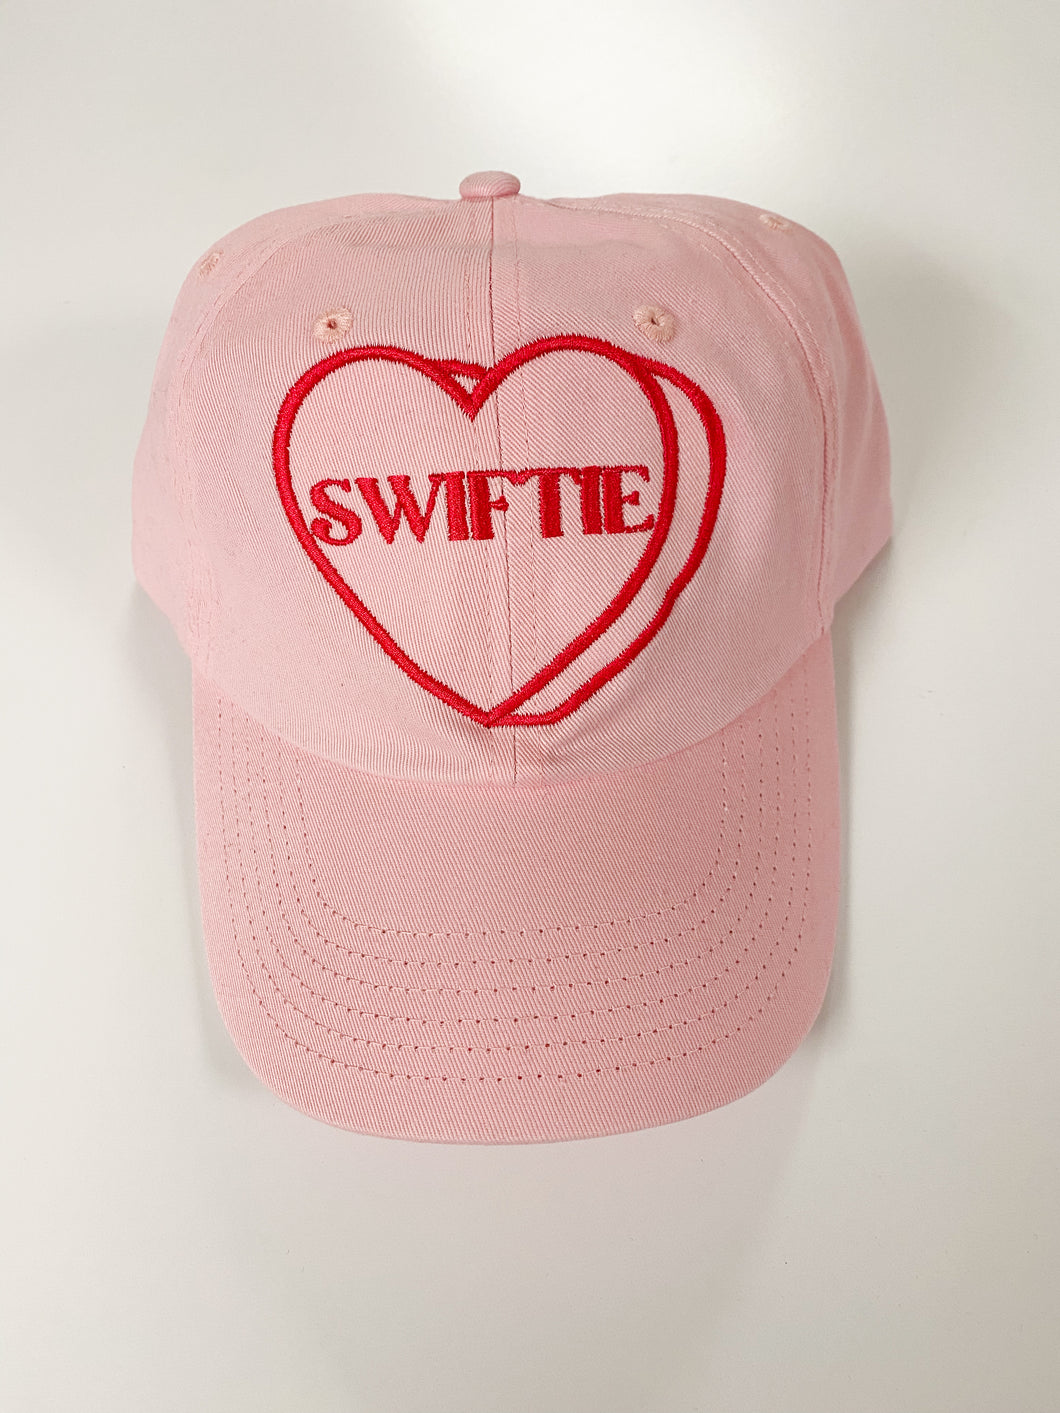 Swiftie Relaxed Fit Hat